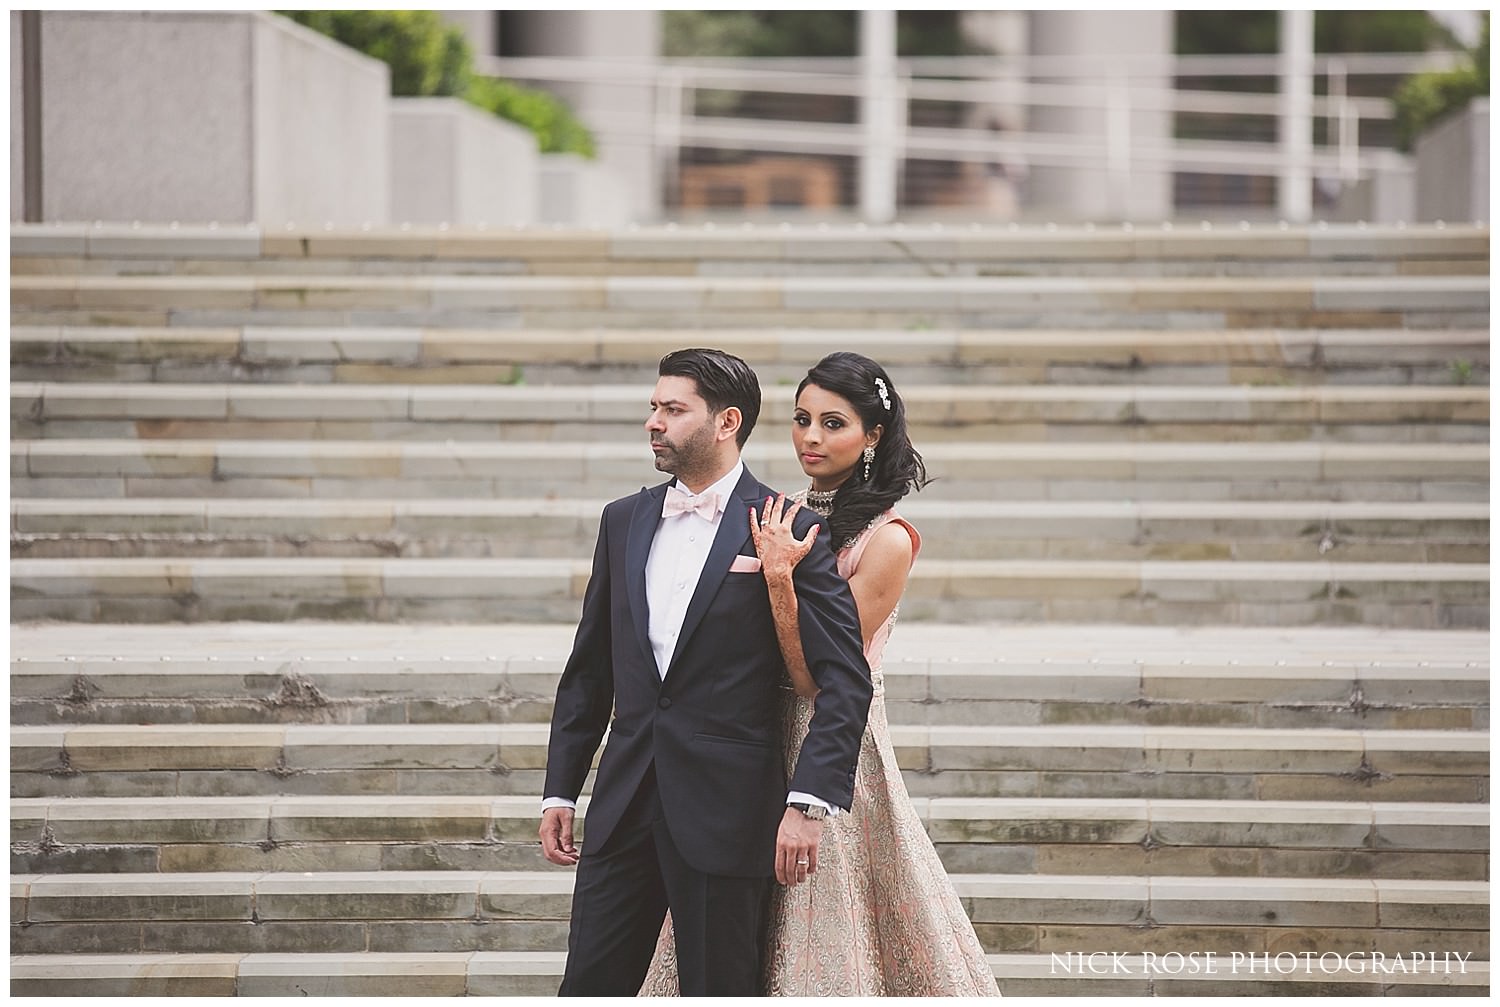  Hindu bride and groom photograph on steps at Canary Wharf in London 